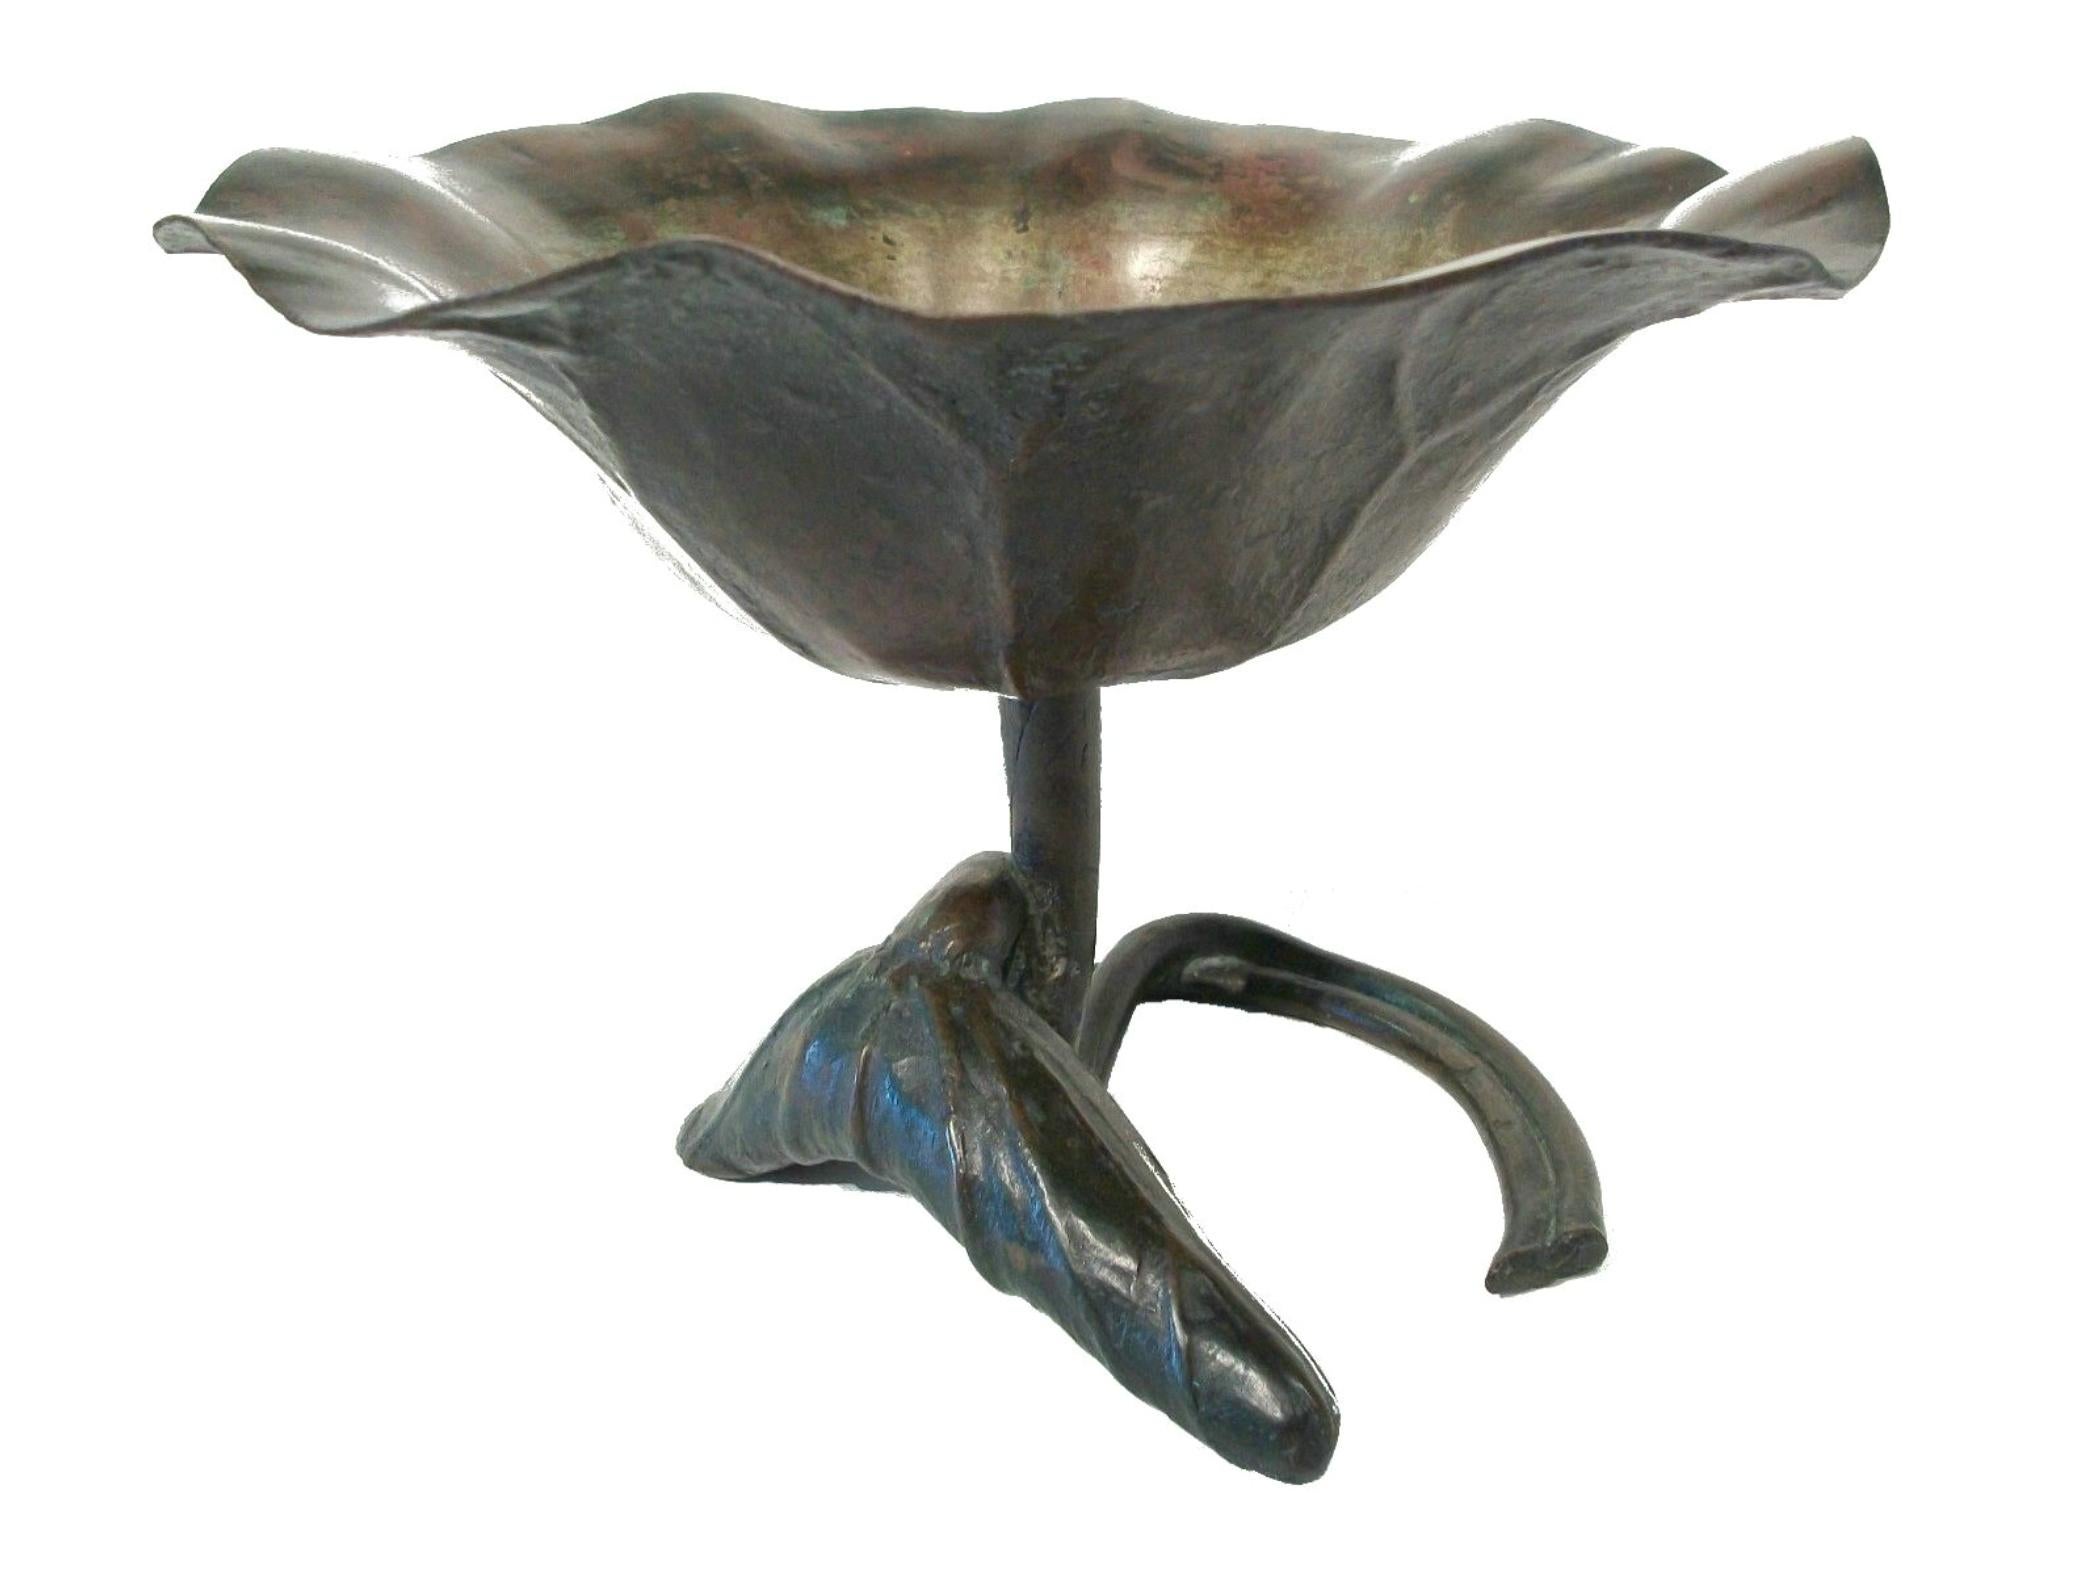 JOHN SCOTT BRADSTREET (Attributed) - Arts & Crafts cast and patinated bronze center-piece flower bowl taking the form of a lotus - later patinated flower 'frog' - unsigned - United States - circa 1900.

Excellent vintage condition - oxidation of